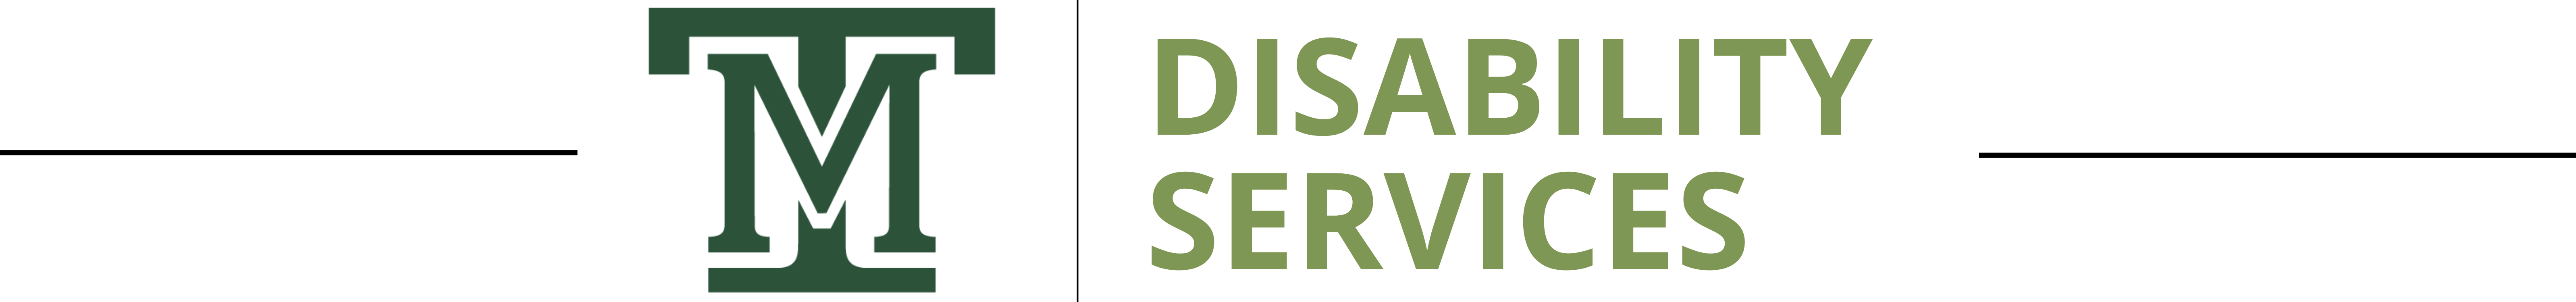 Disability Services banner